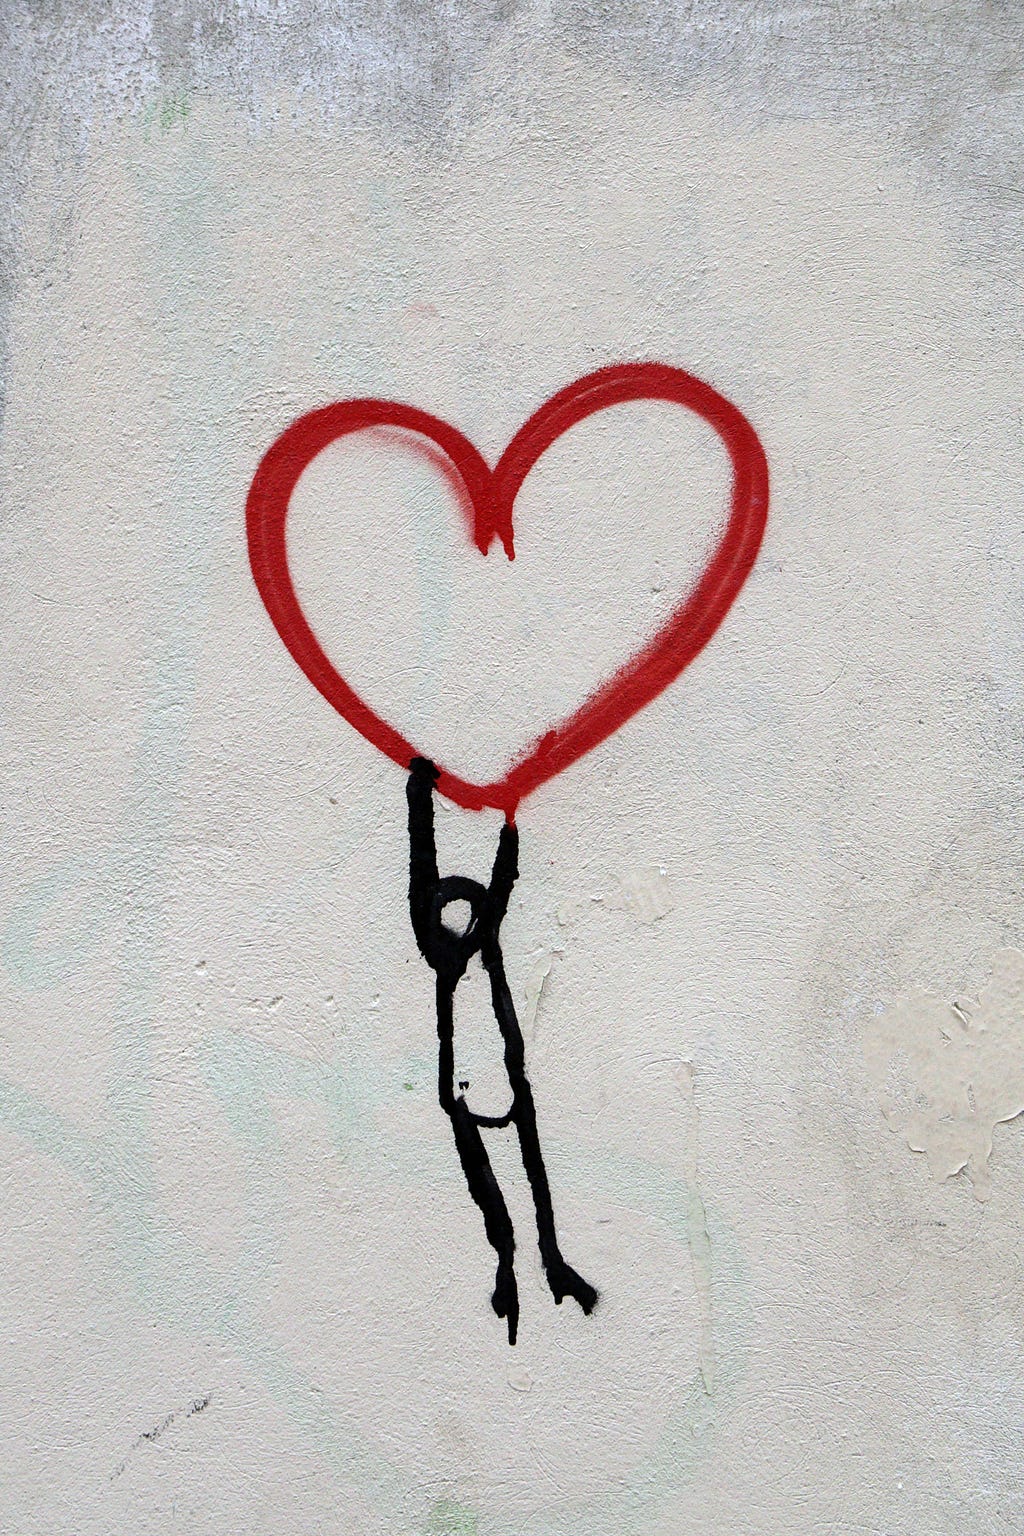 Man hanging from red heart drawing.